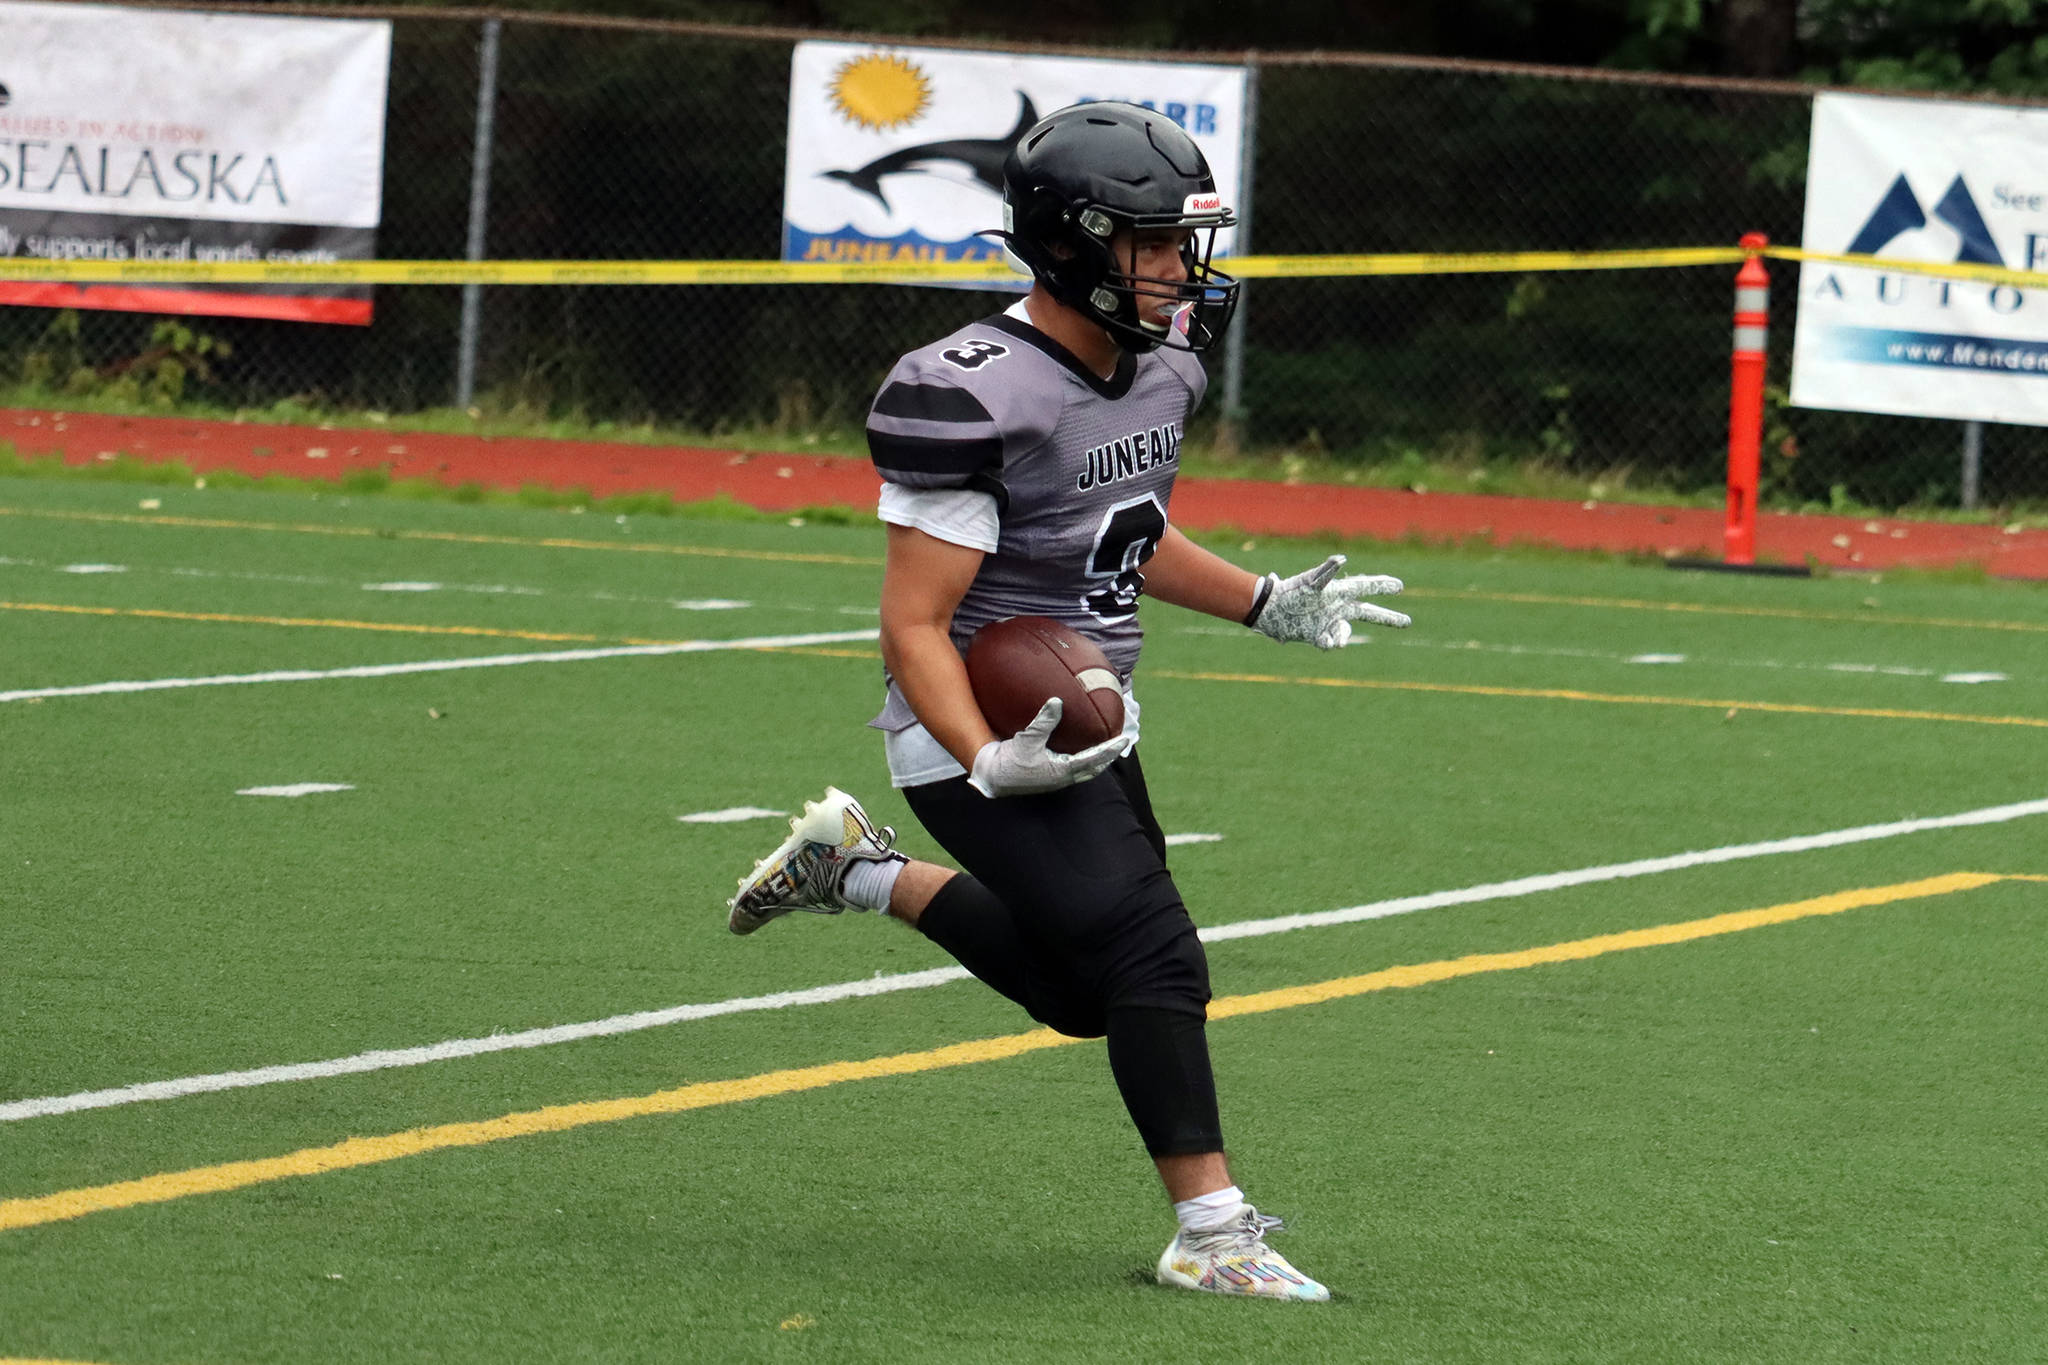 Gaby Soto crosses the goal line to put six points on the board for the Huskies in Juneau’s first high school football game in nearly two years. Soto scored three touchdowns for the Huskies in the first half. (Ben Hohenstatt / Juneau Empire)